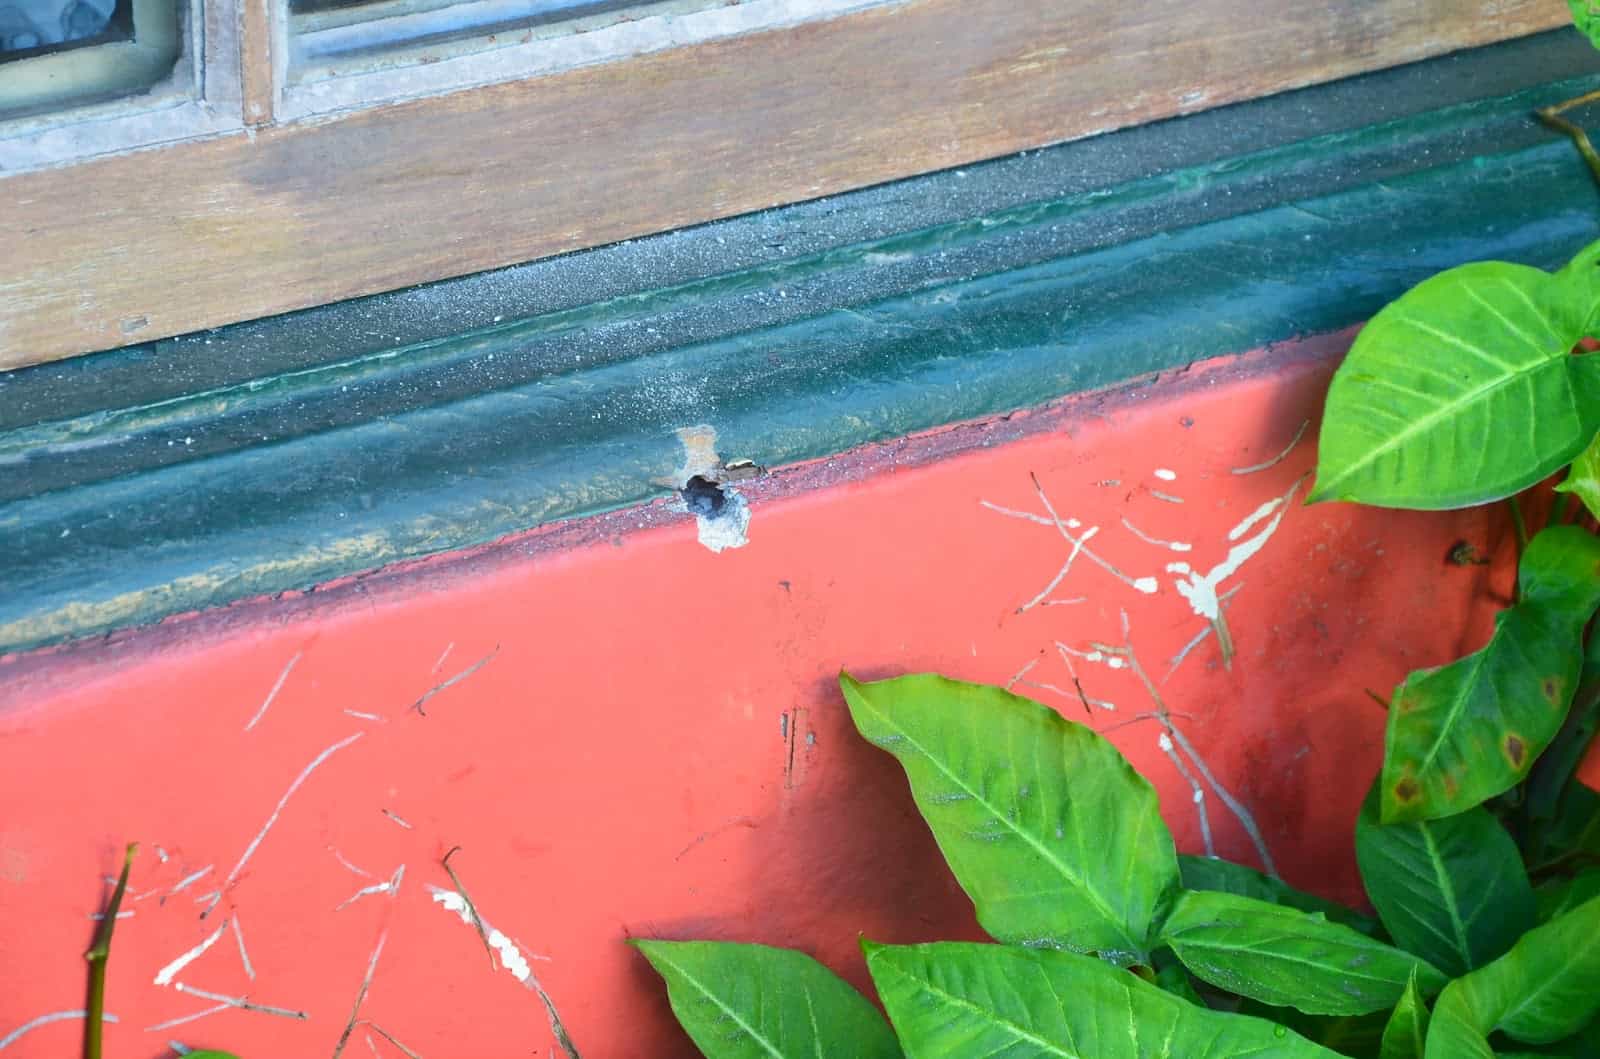 Bullethole in the front of the hostel in Ilhabela, Brazil